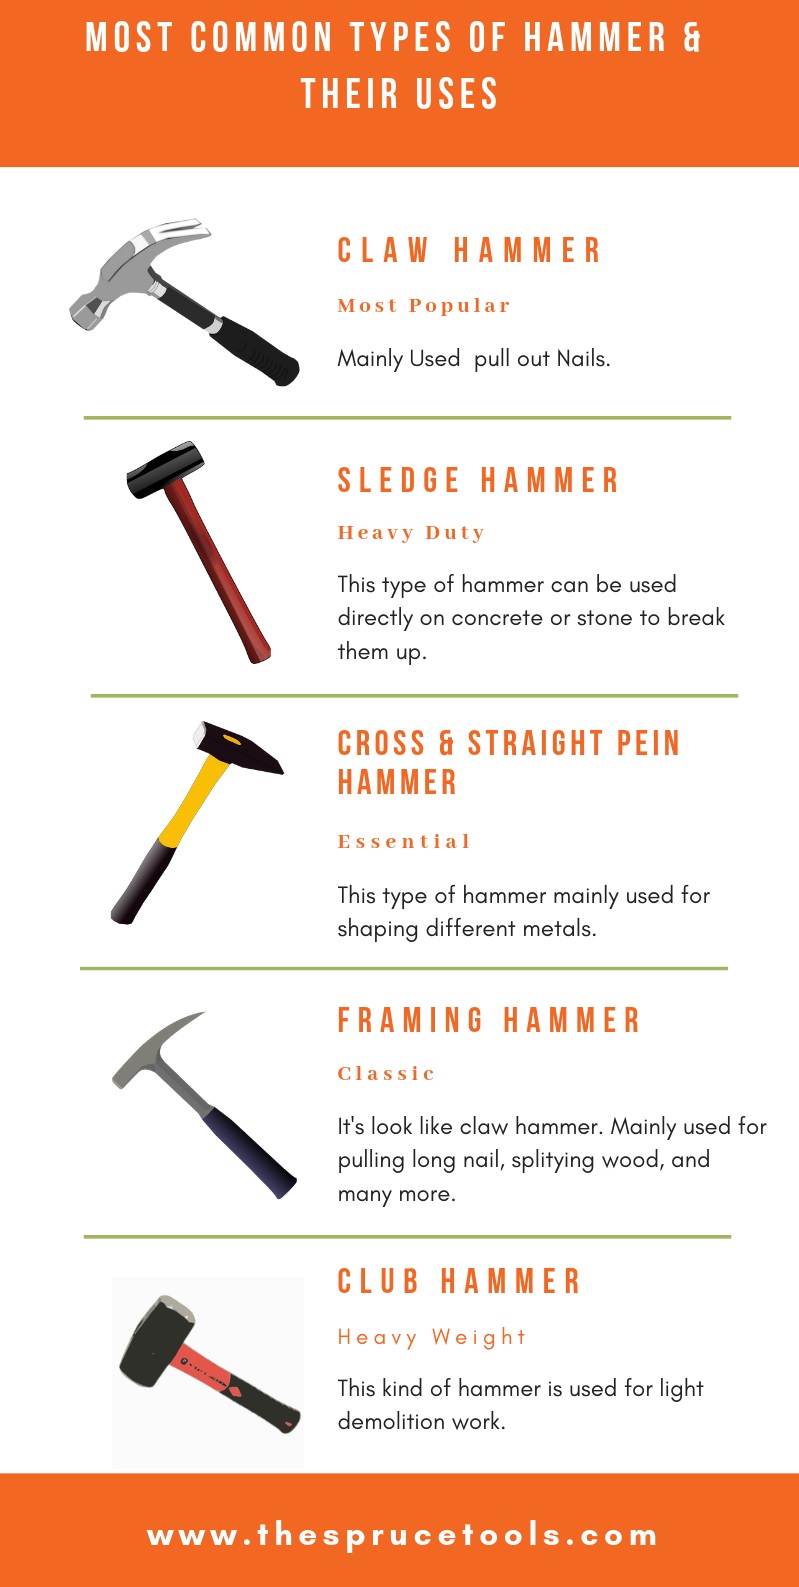 Different types of hammers and their uses